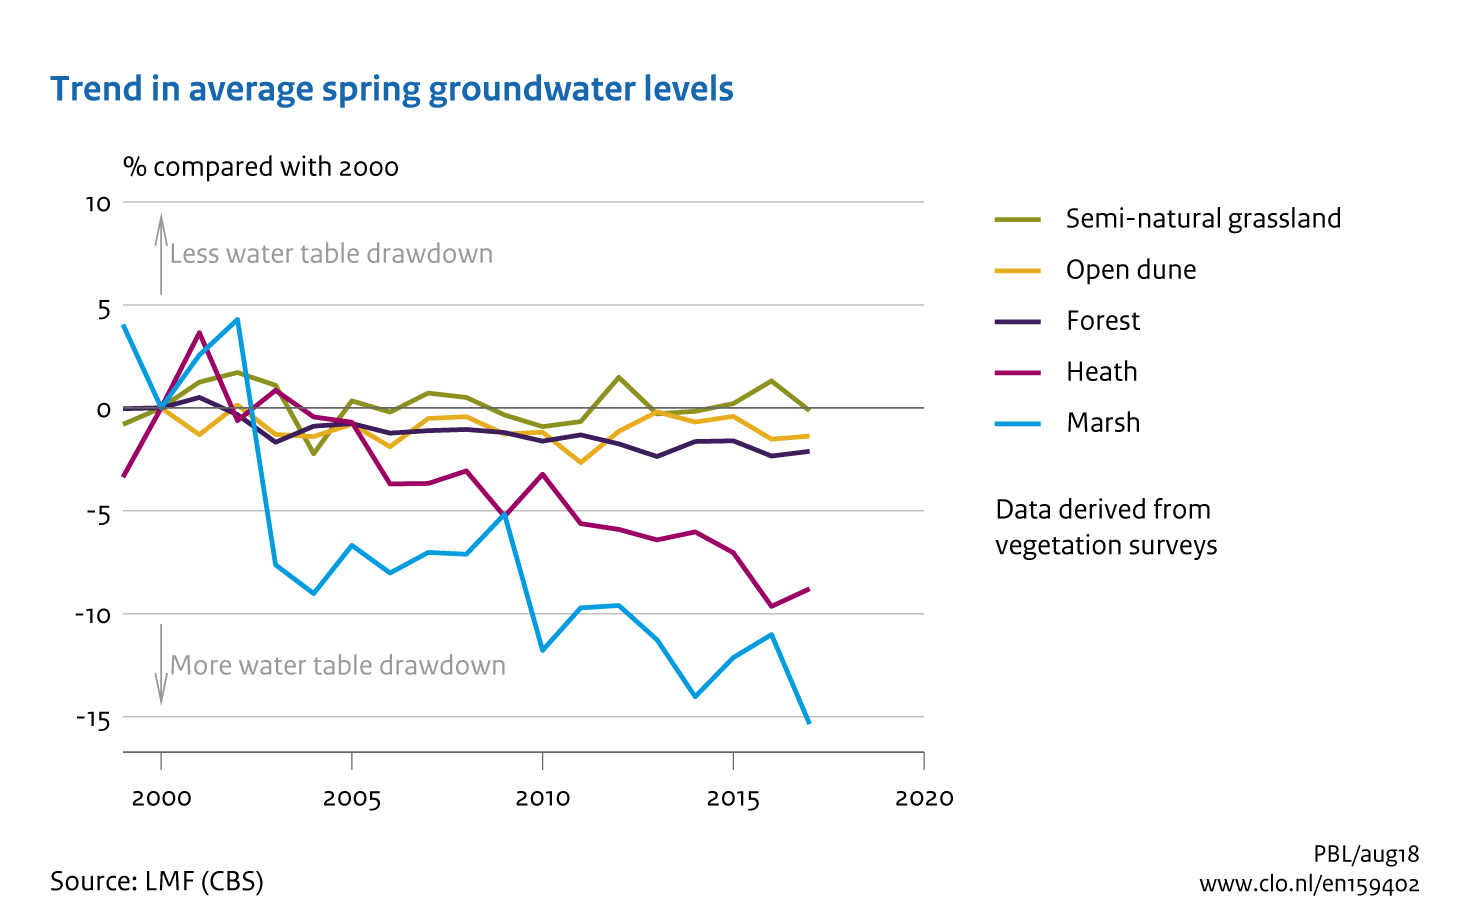 Image Trend in average spring groundwater levels. The image is further explained in the text.